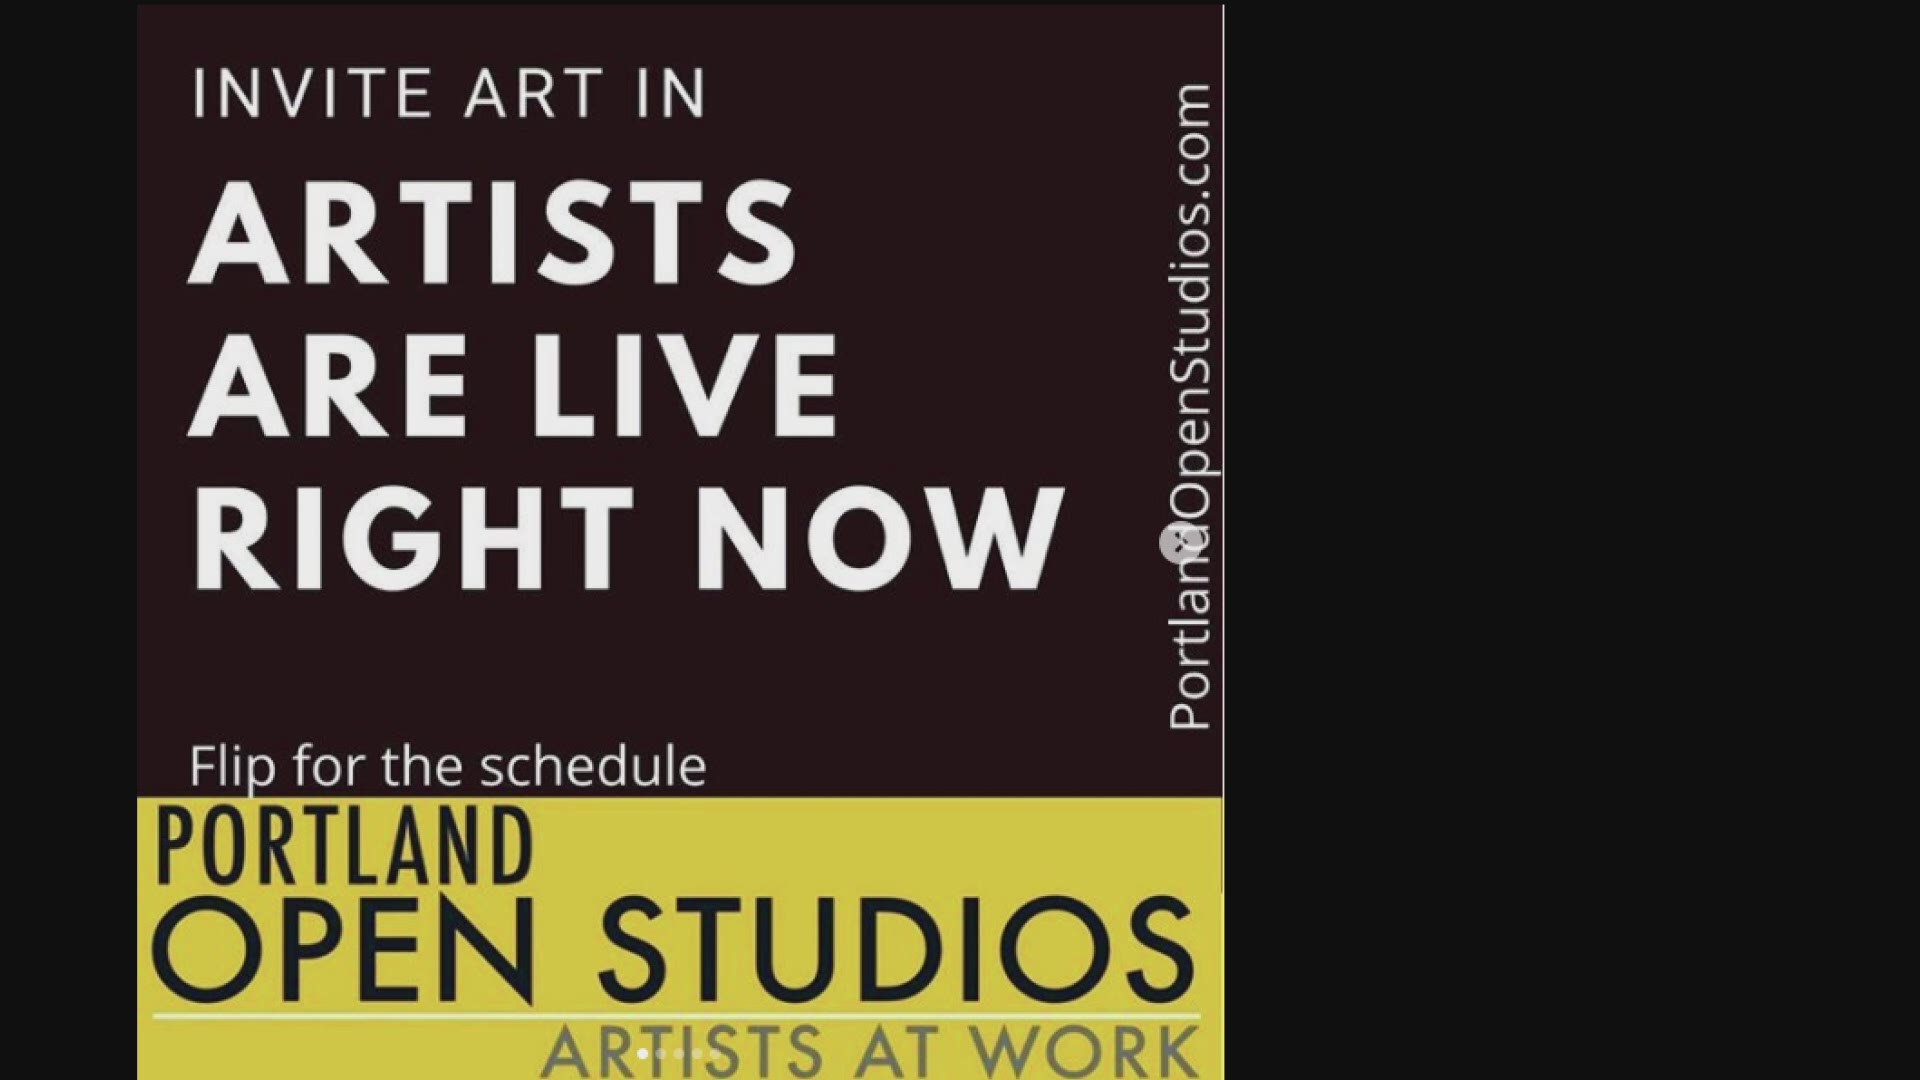 For 22 years the annual Portland Open Studios art tour has offered a behind the scenes look at the artistic process — this year the event has gone virtual.